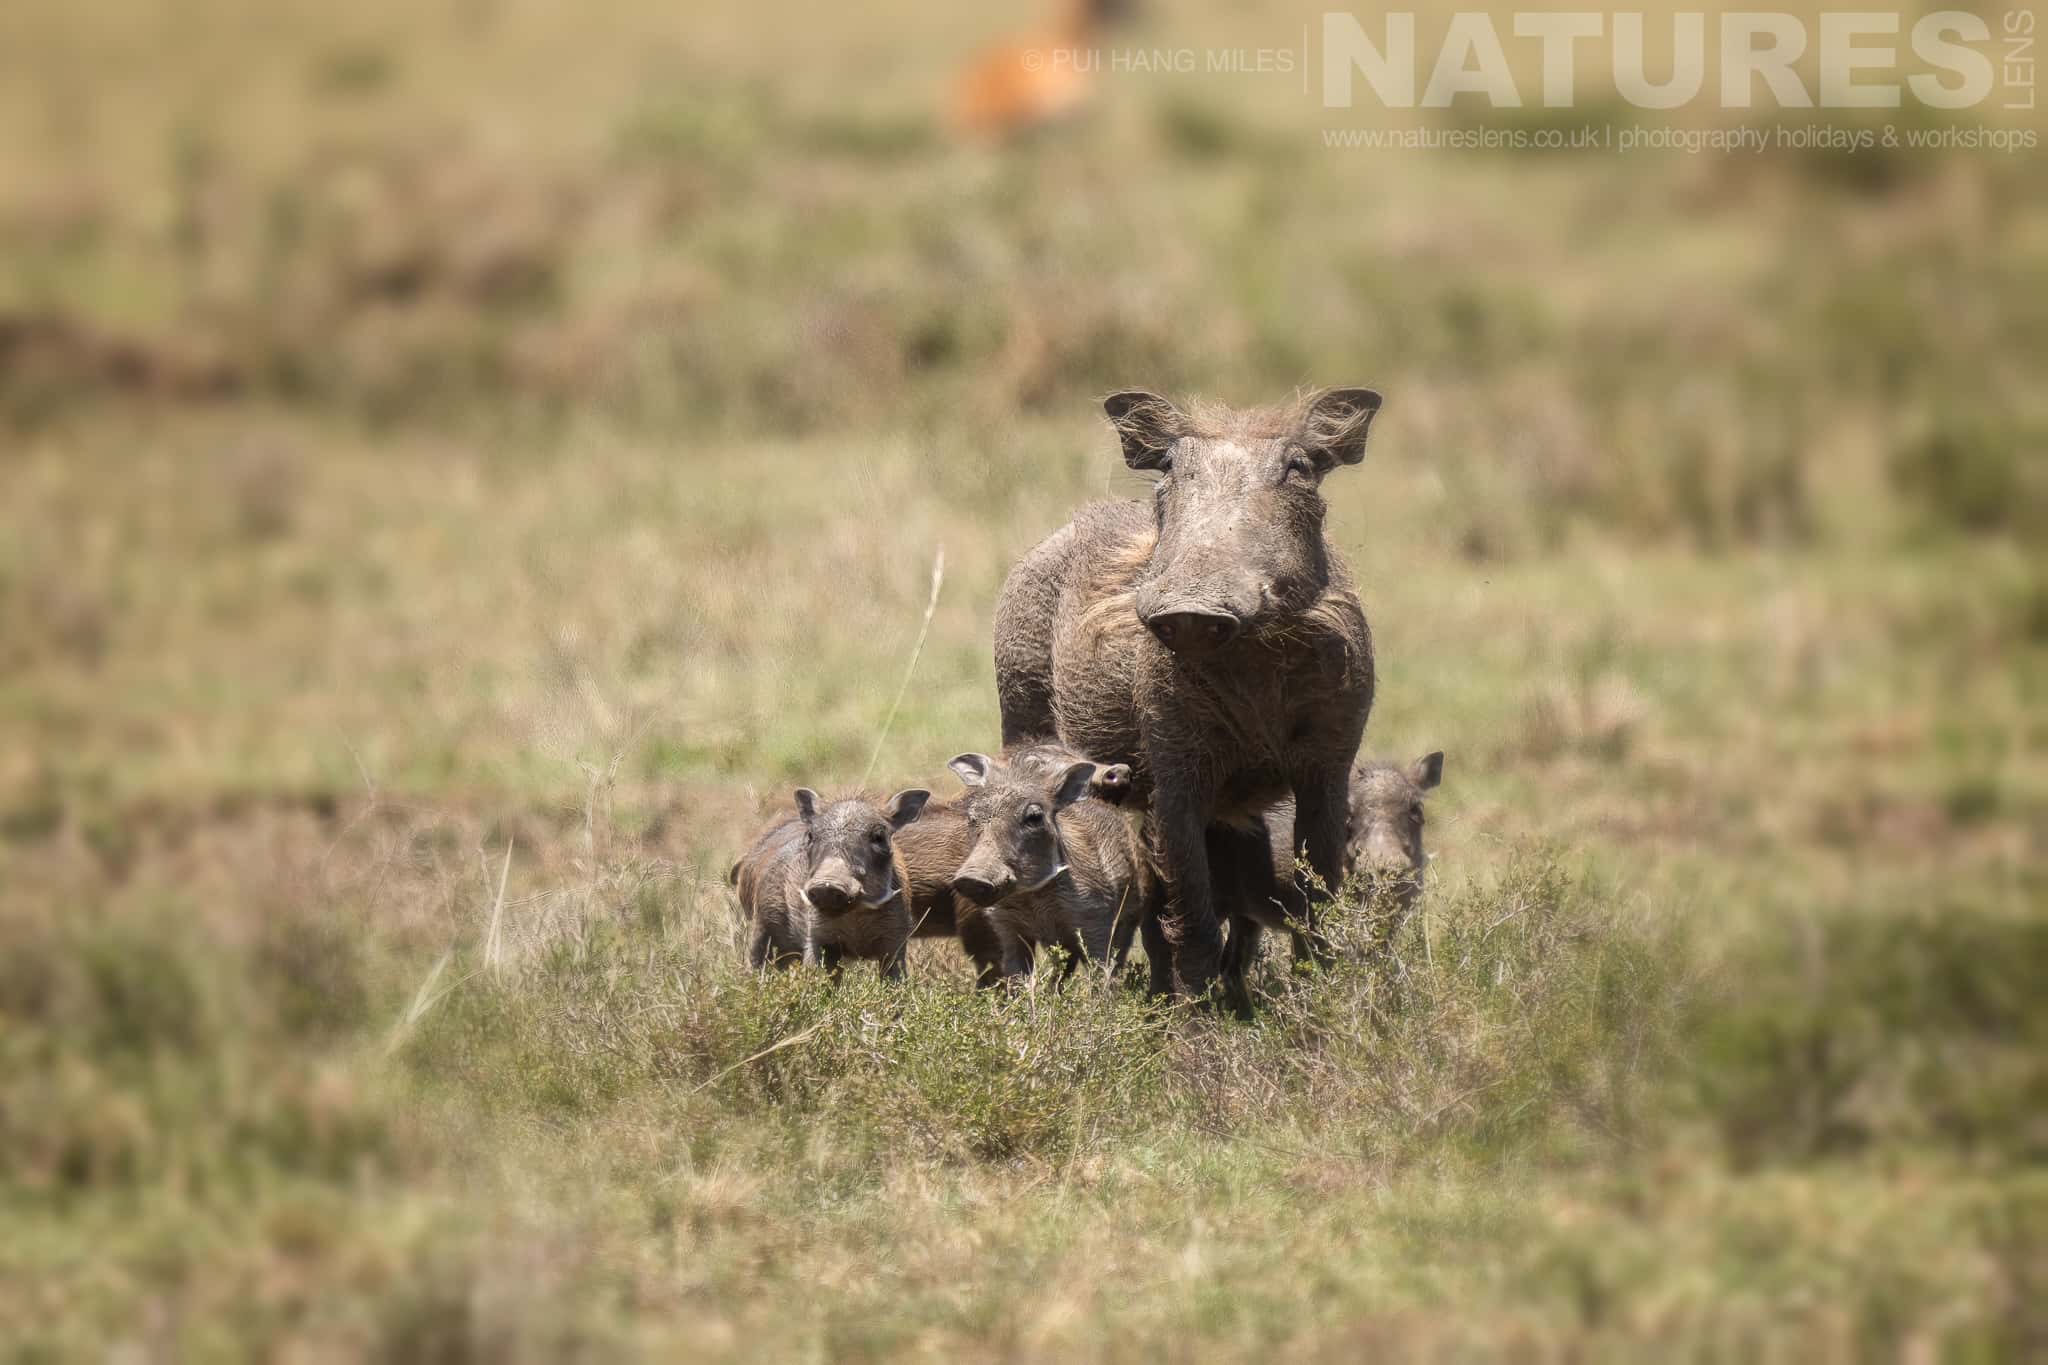 A Female Warthog With Her Family Of Young Photographed During A Natureslens Photography Holiday To Photograph The Wildlife Of The Maasai Mara